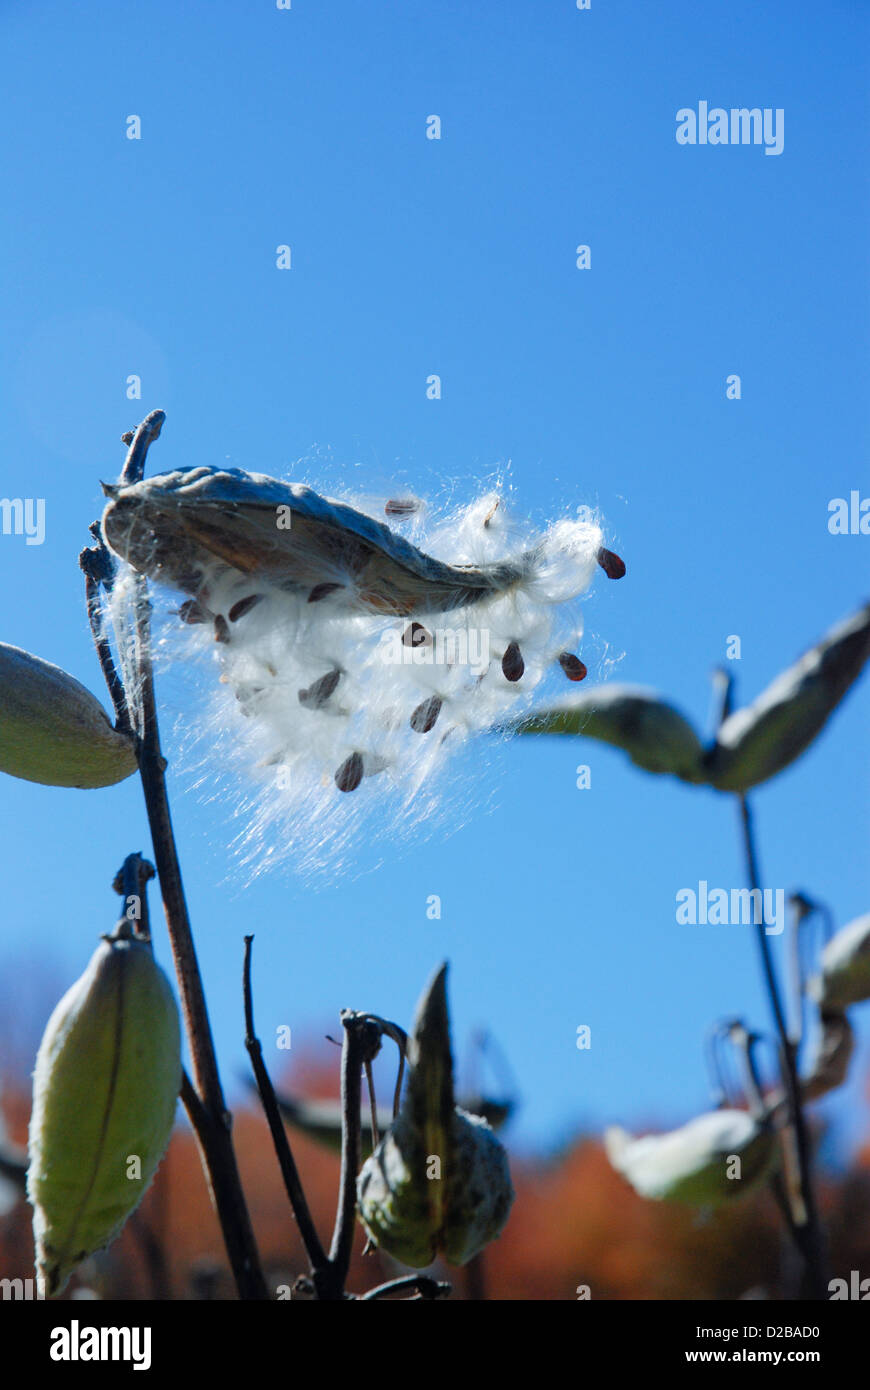 Milkweed Plant Blowing In Wind. Pod Seeds Stock Photo